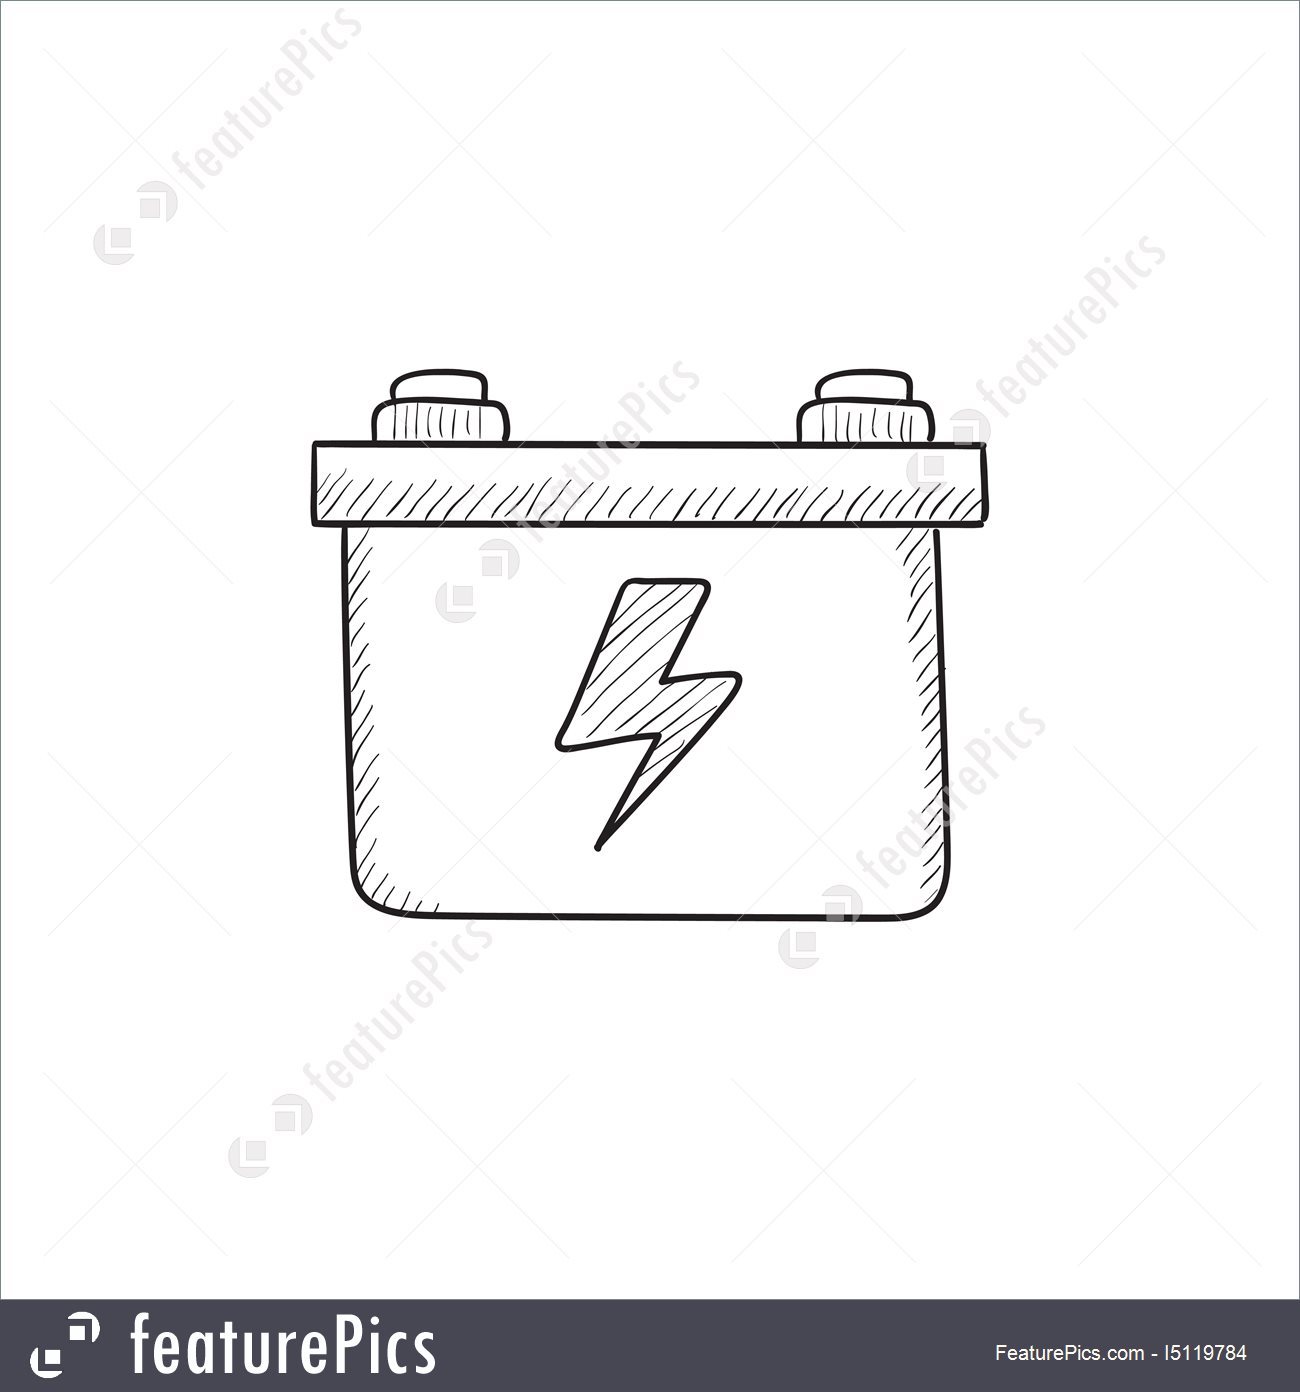 How To Draw A Car Battery Haiper